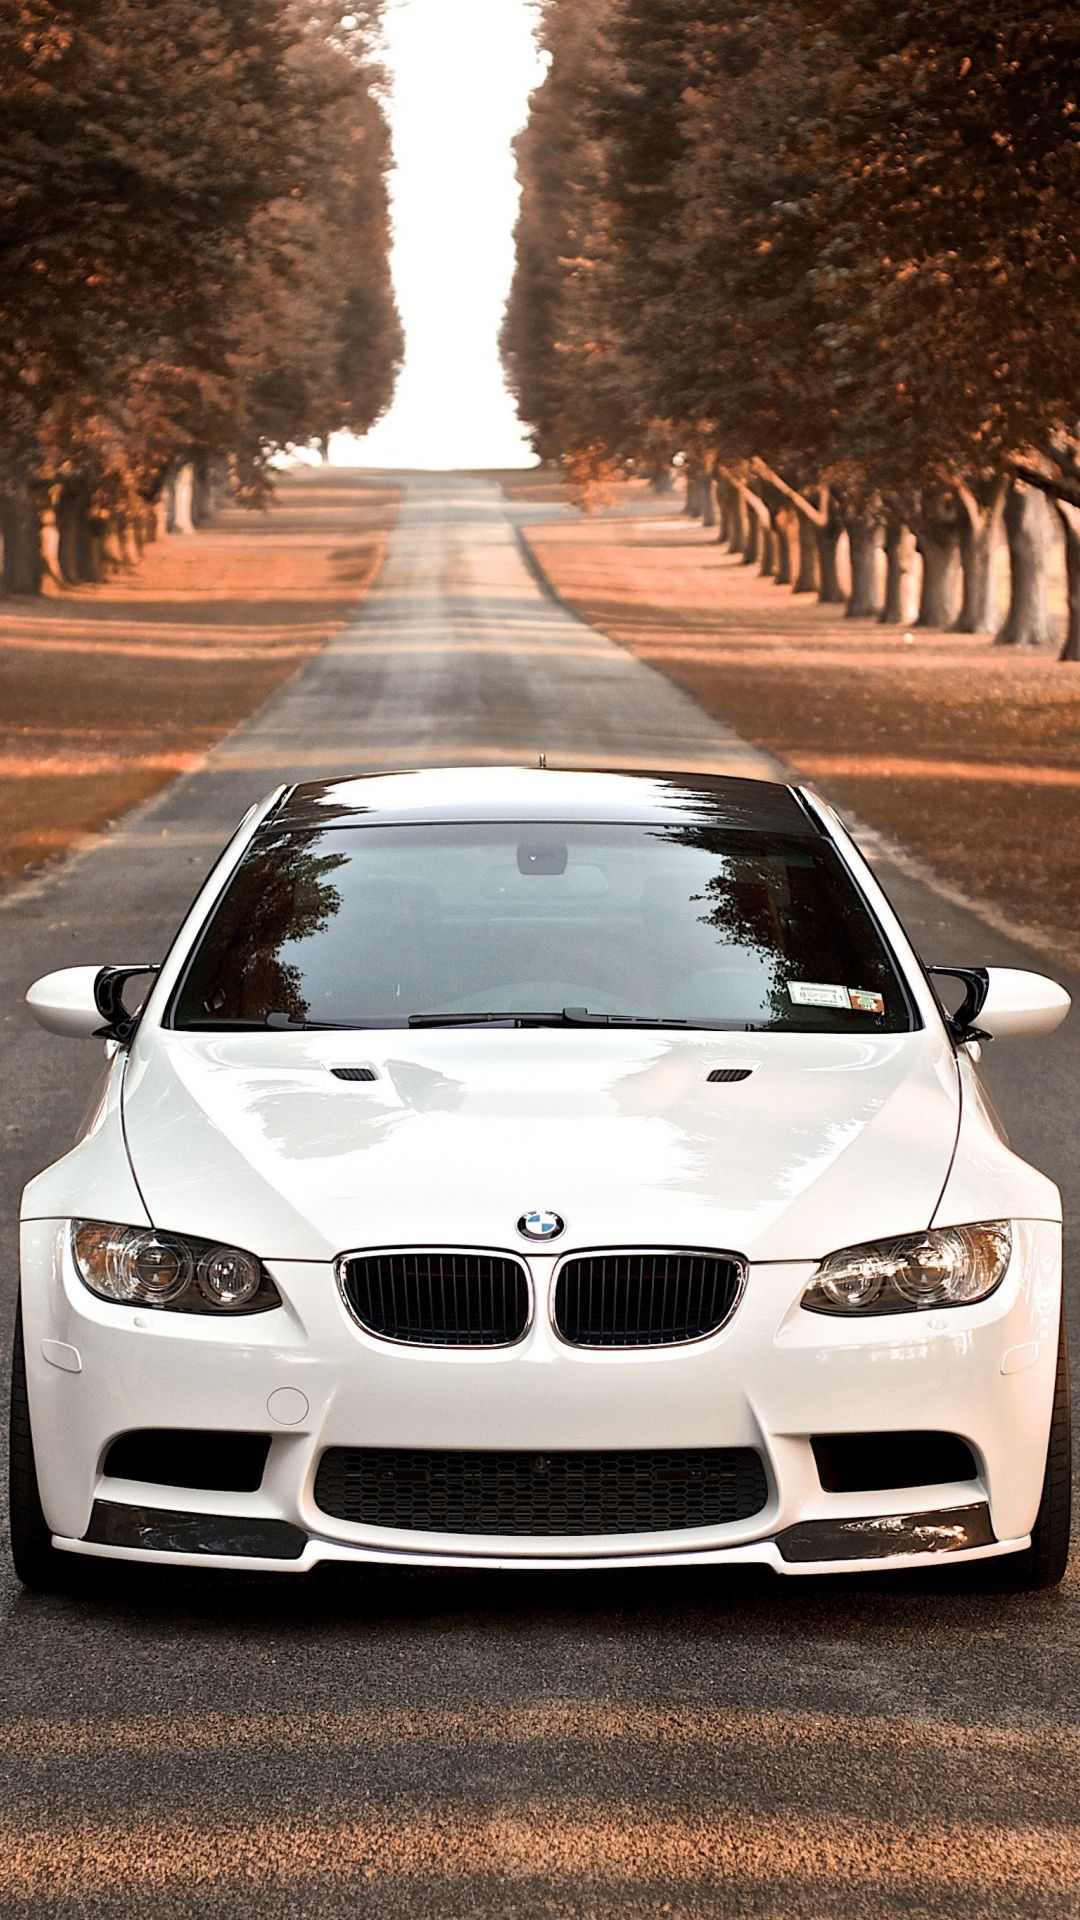 A white bmw car parked on the road - BMW